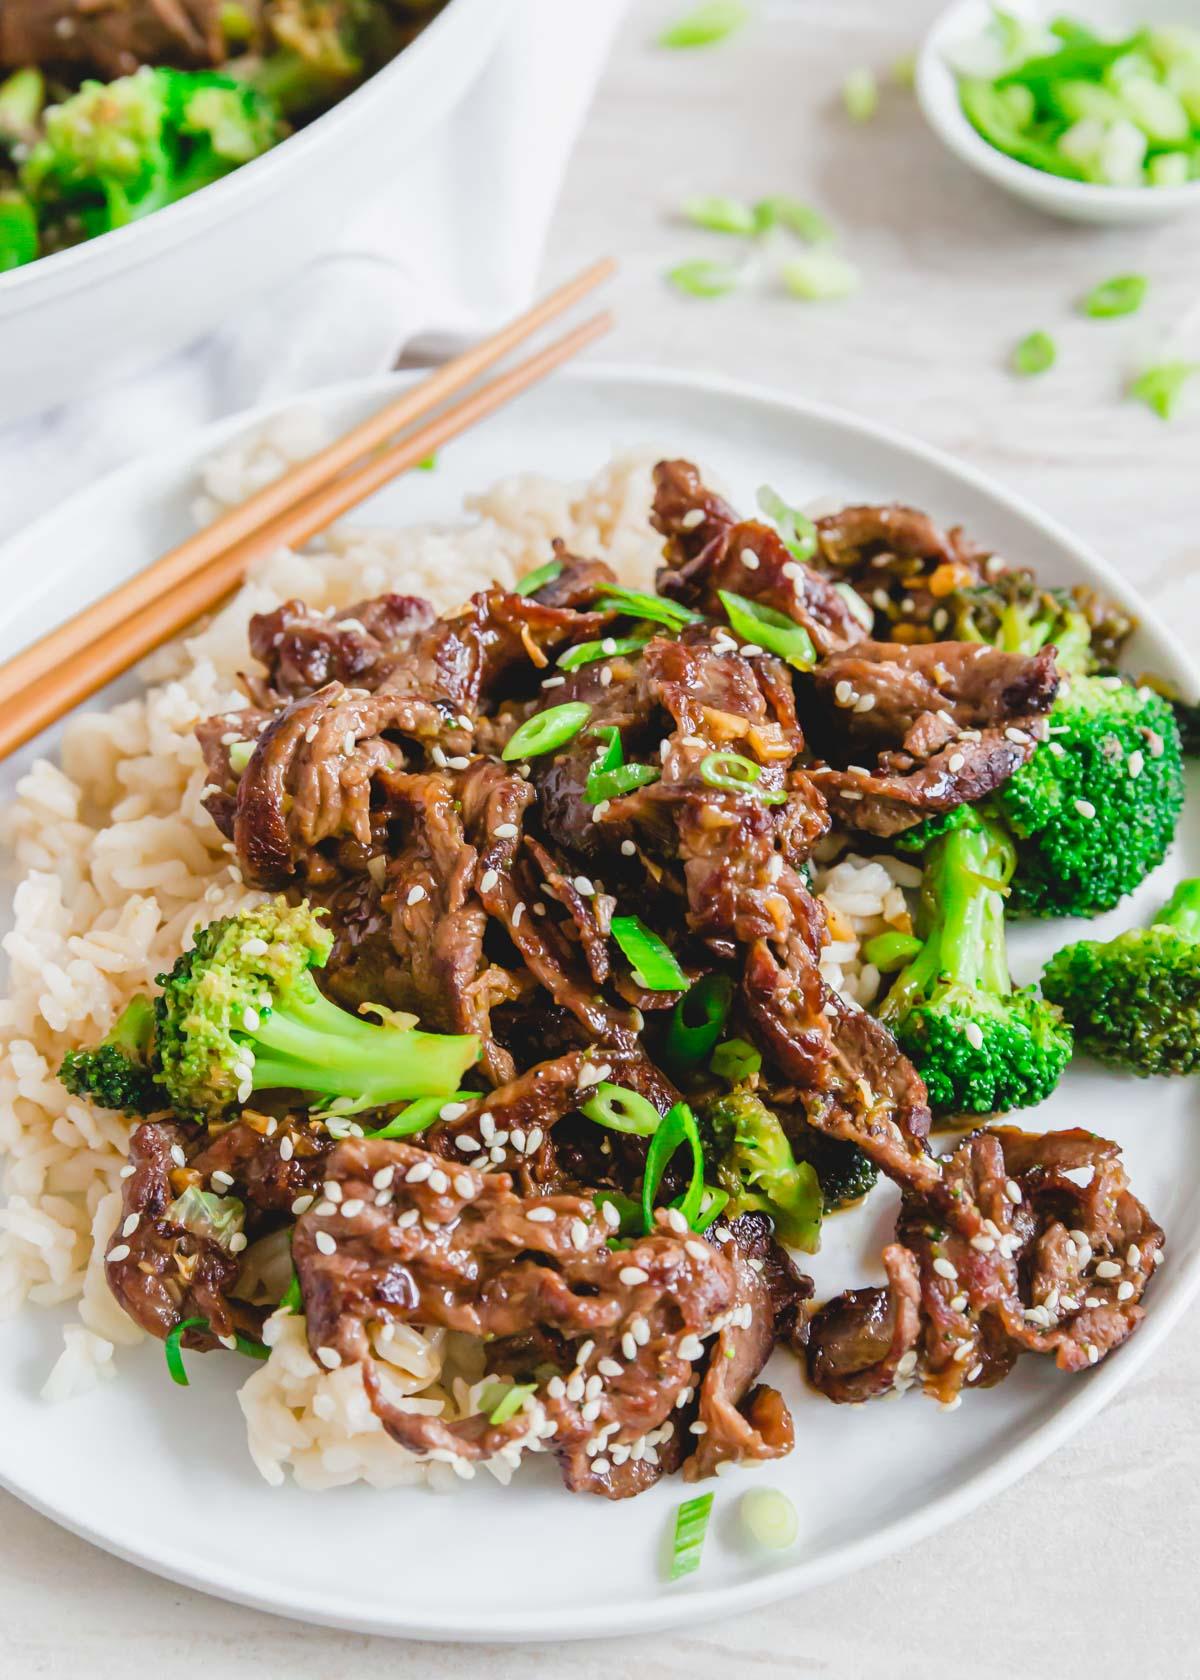 Shaved beef stir fry with broccoli and rice.